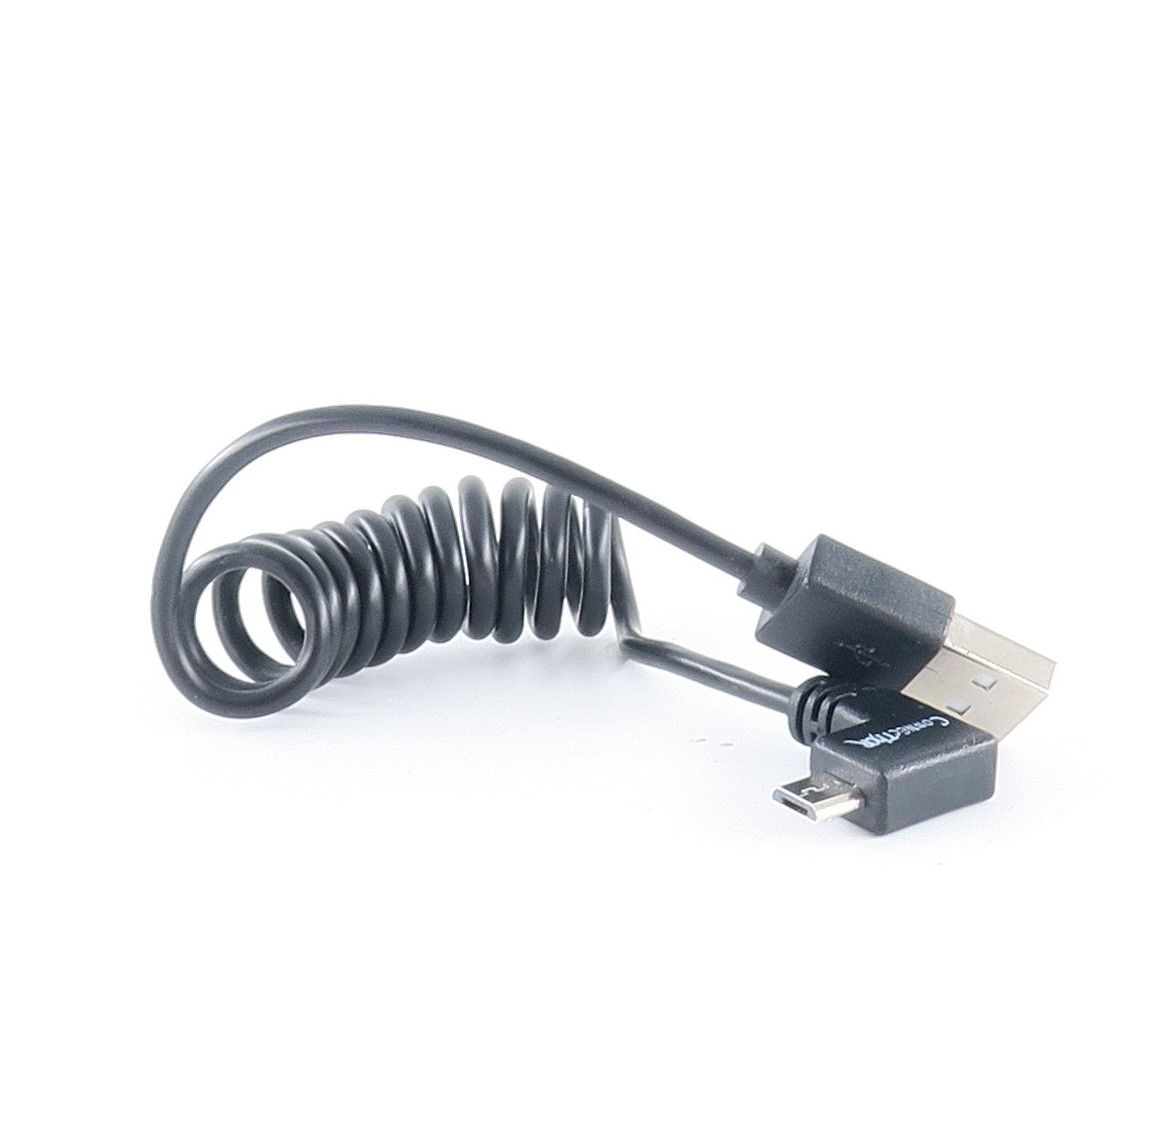 ConnecThor cable - USB 2.0 to micro USB for DJI Drones